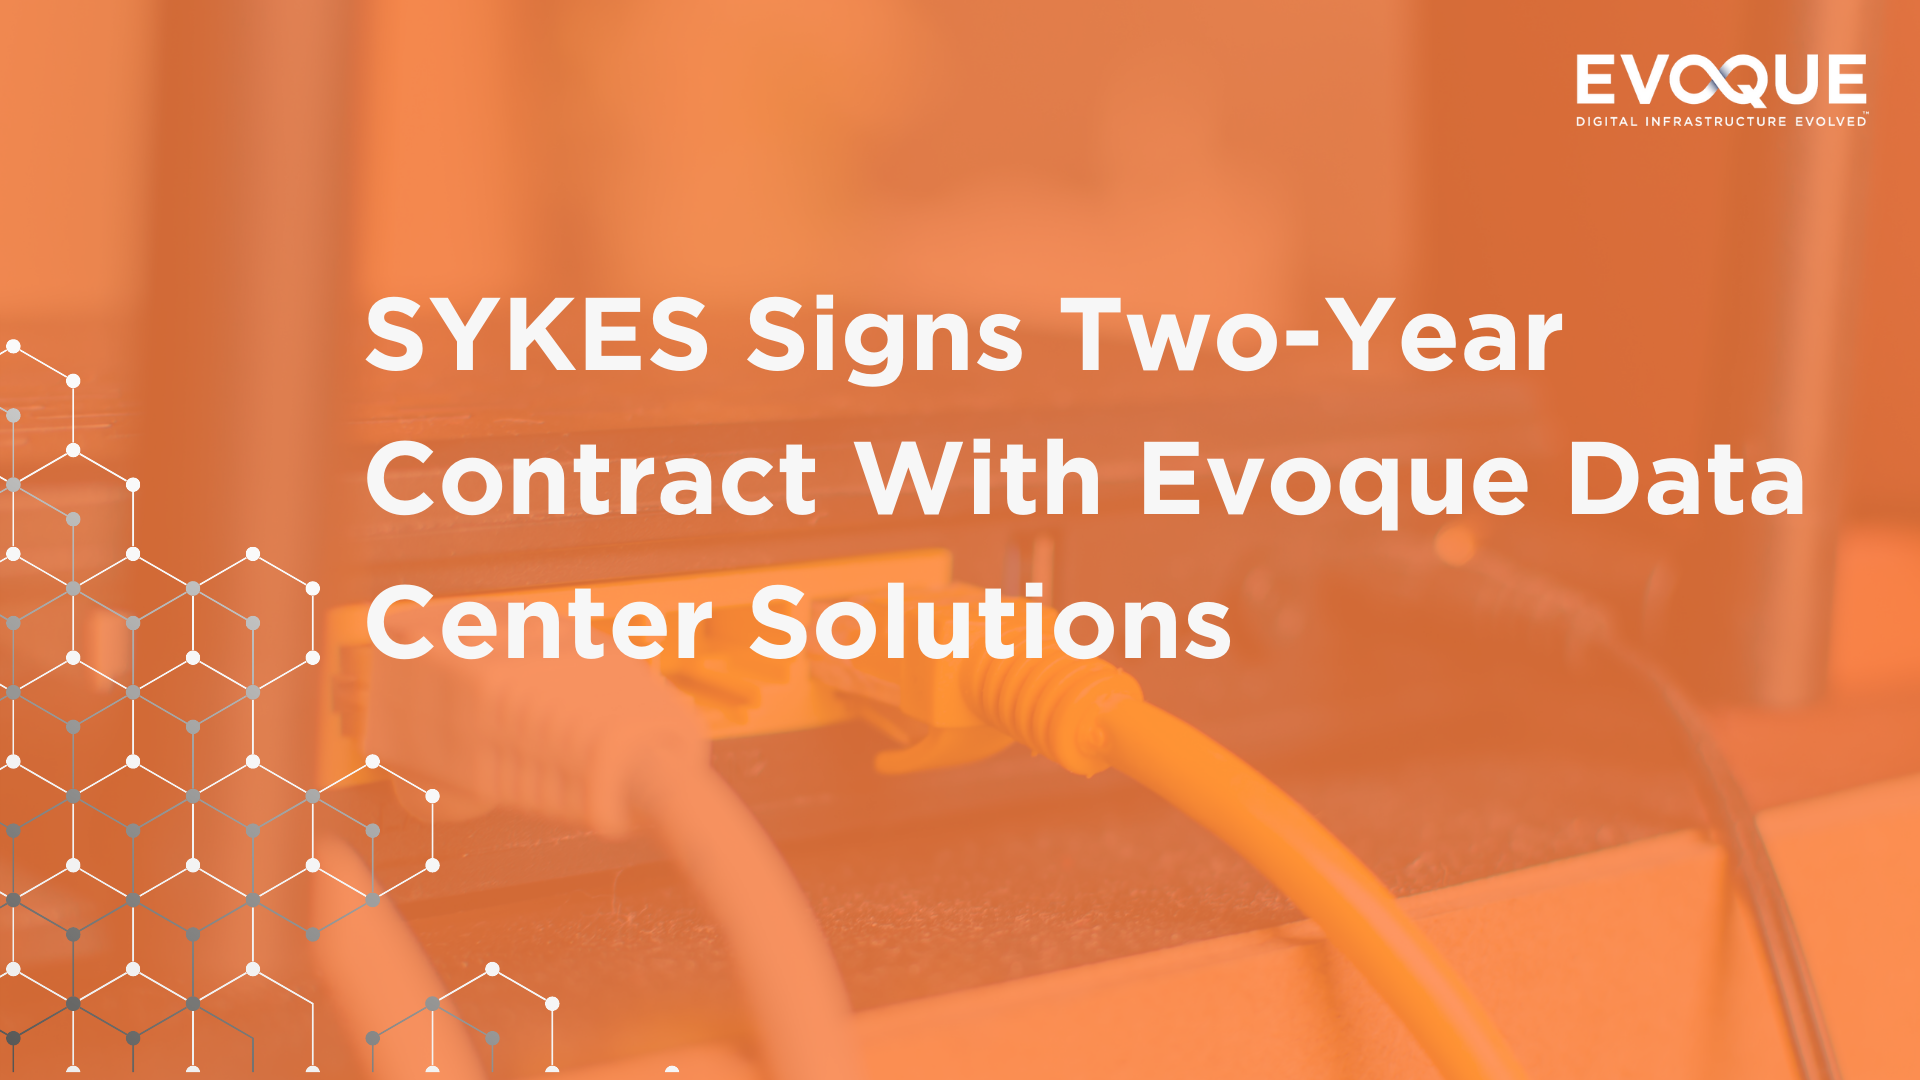 SYKES Signs Two-Year Contract With Evoque Data Center Solutions